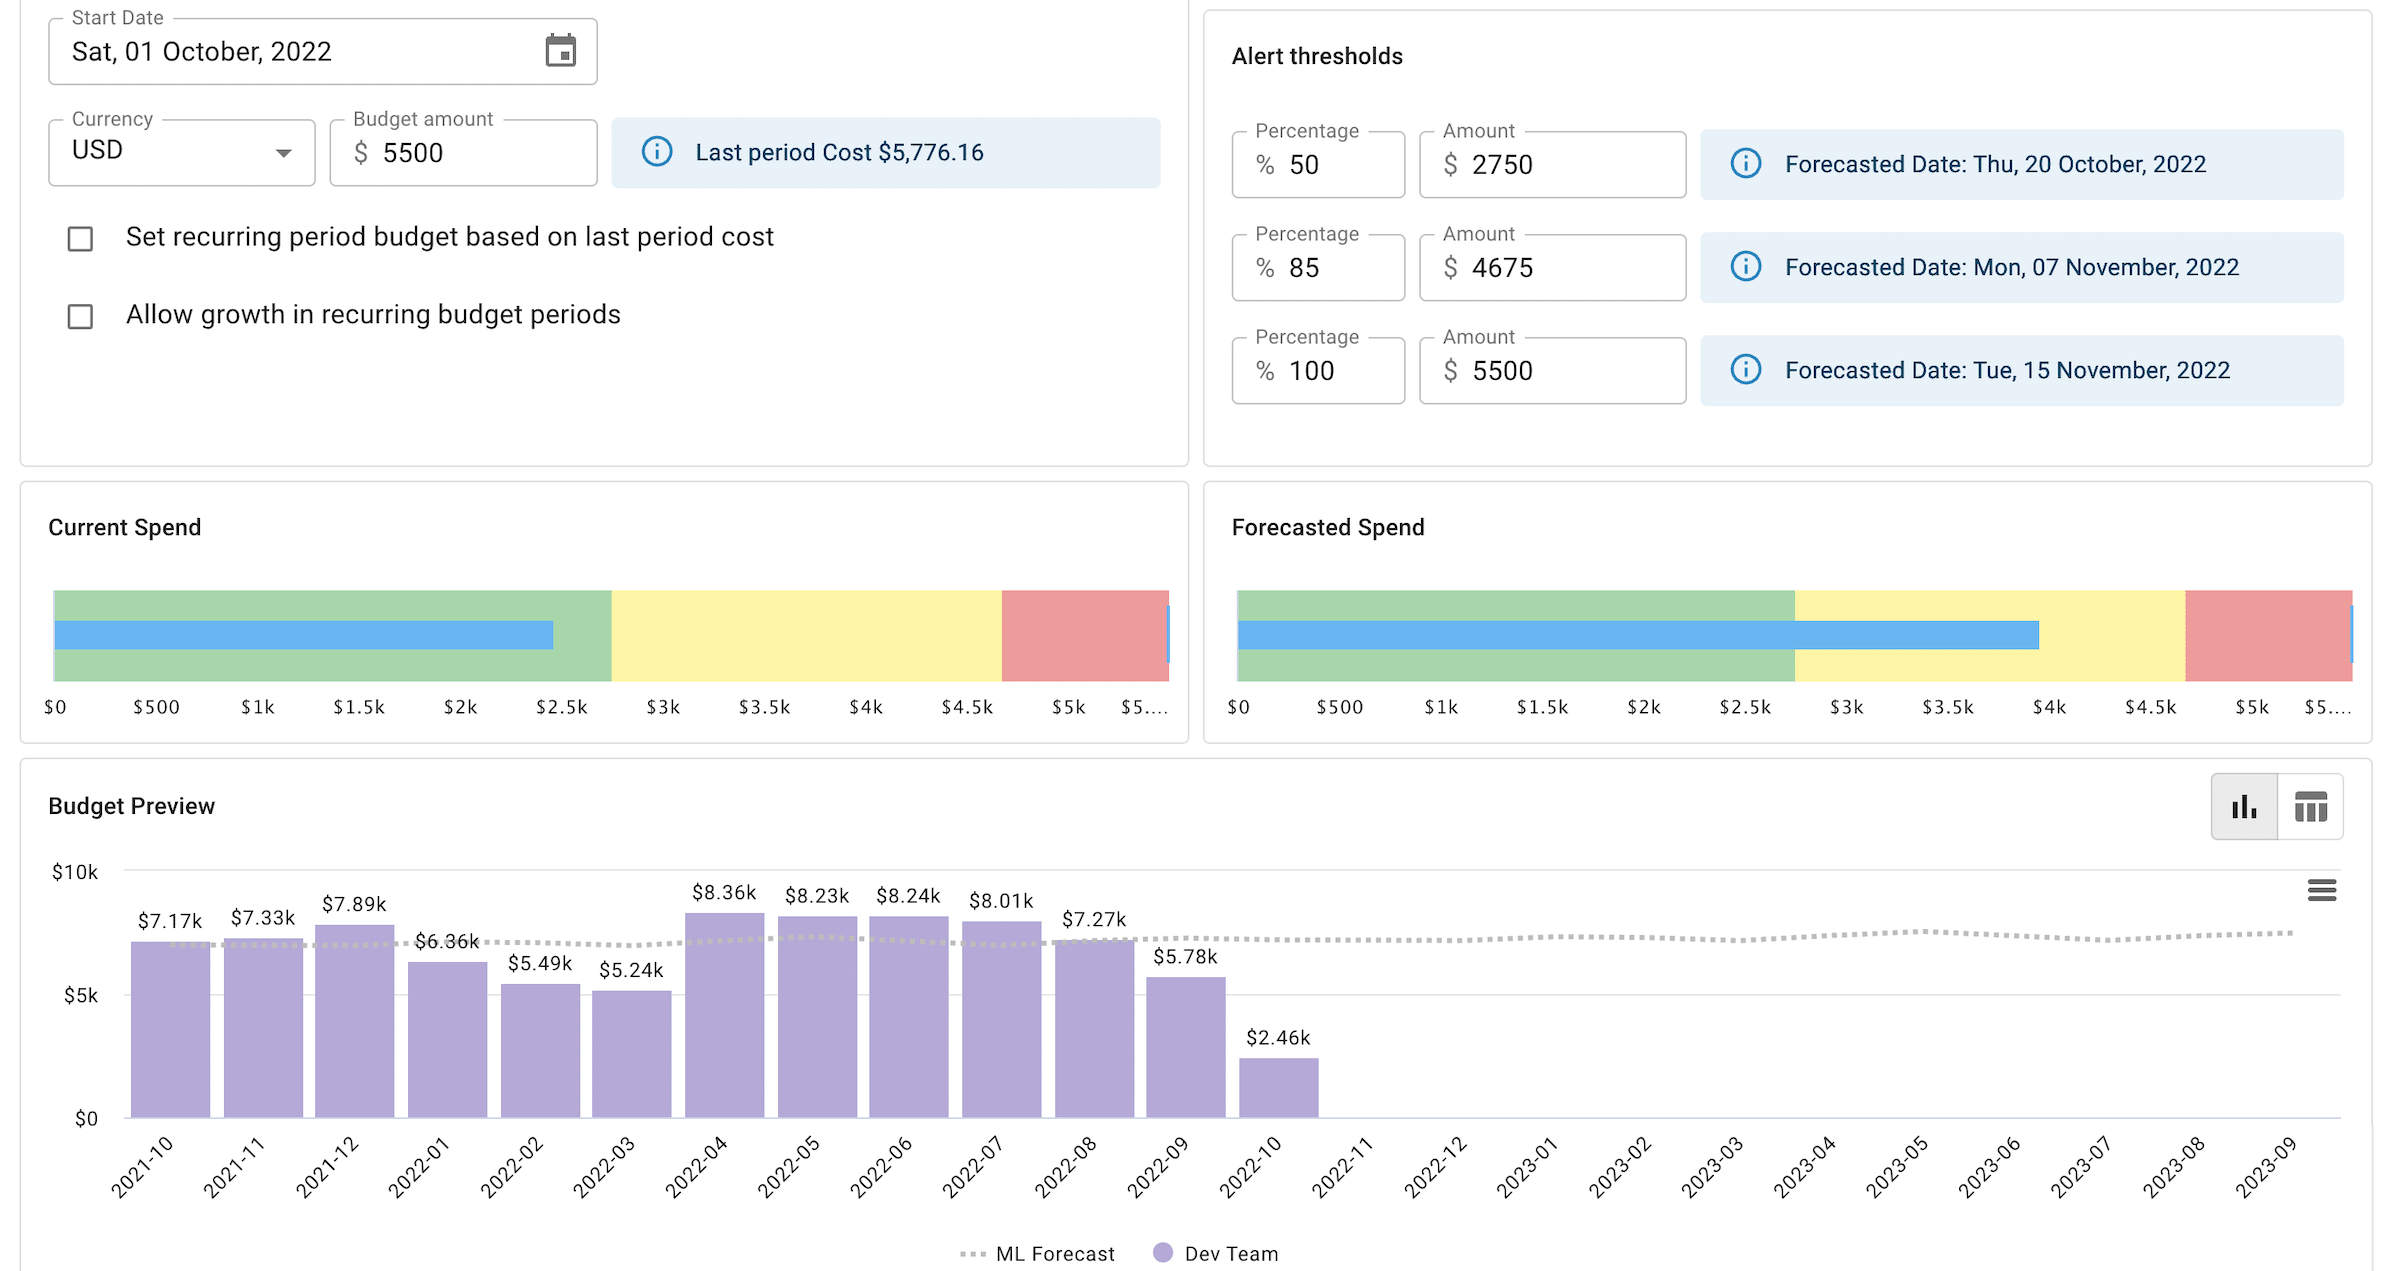 Budget preview and spend visualization